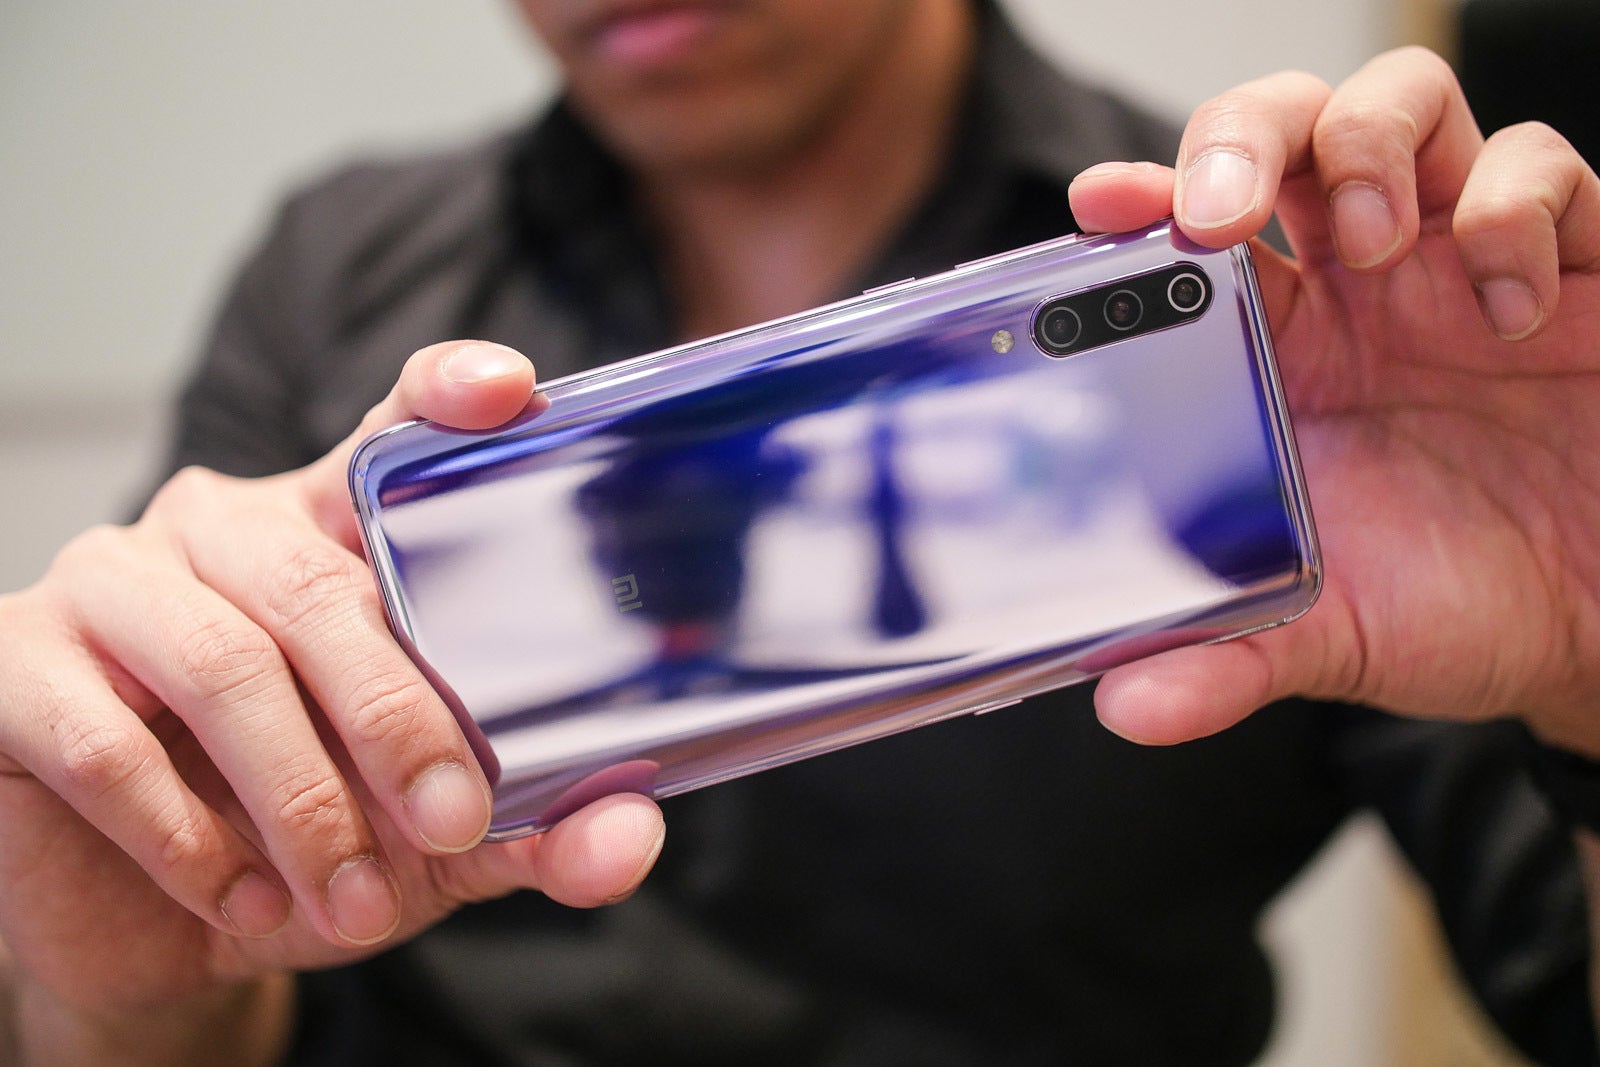 Xiaomi Mi 9 hands-on: Now playing with the big boys